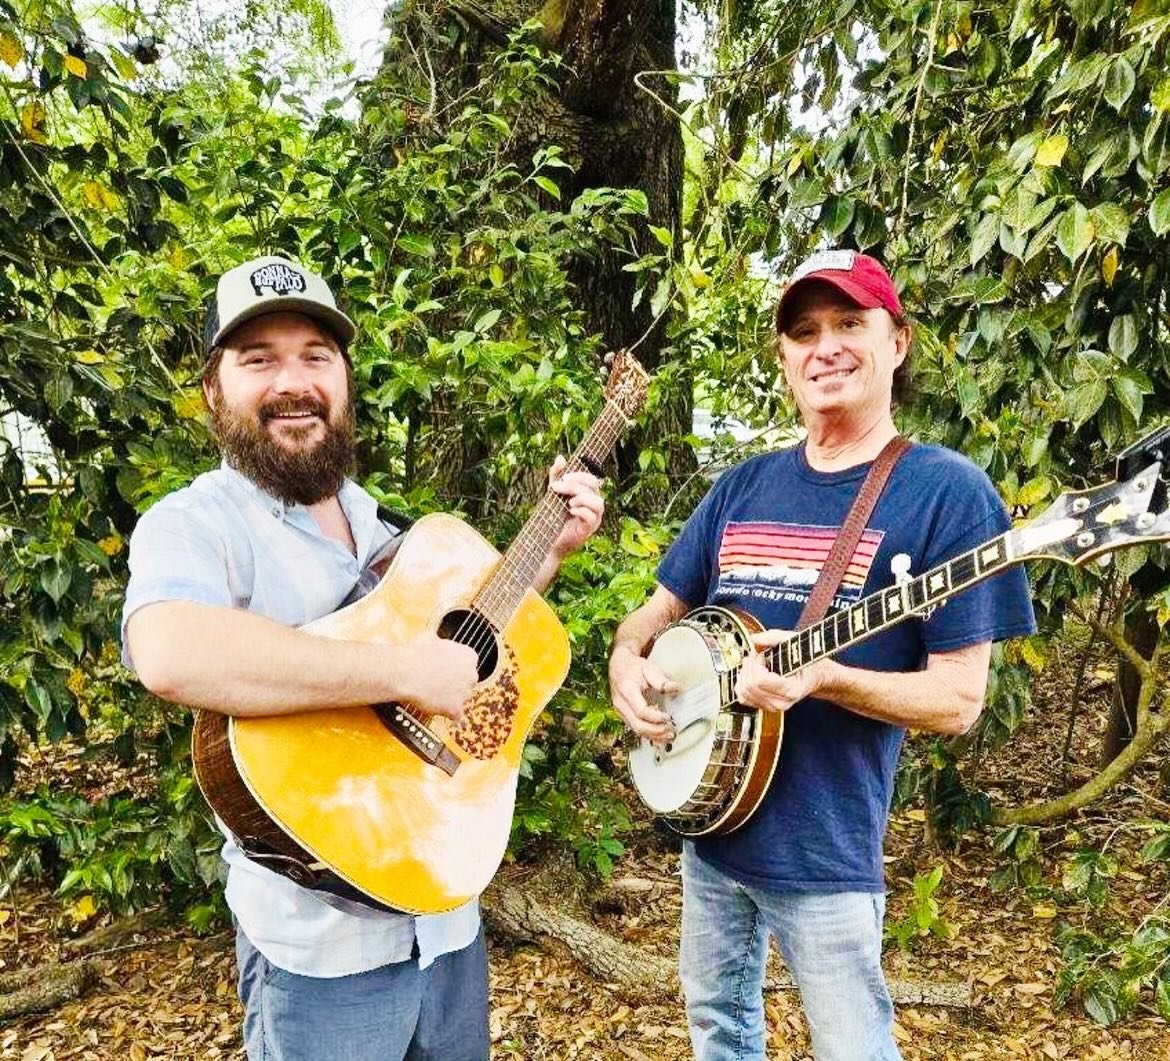 Happy Sunday Funday! ☀️

The weather could not be more beautiful today and we have @evanwrose and Bobby Welch here playing to 3pm, bringin&rsquo; some major bluegrass music to Sea Wolf BGBC Brunch! 🪕

As always, brunch and live music is to 3pm, lunc